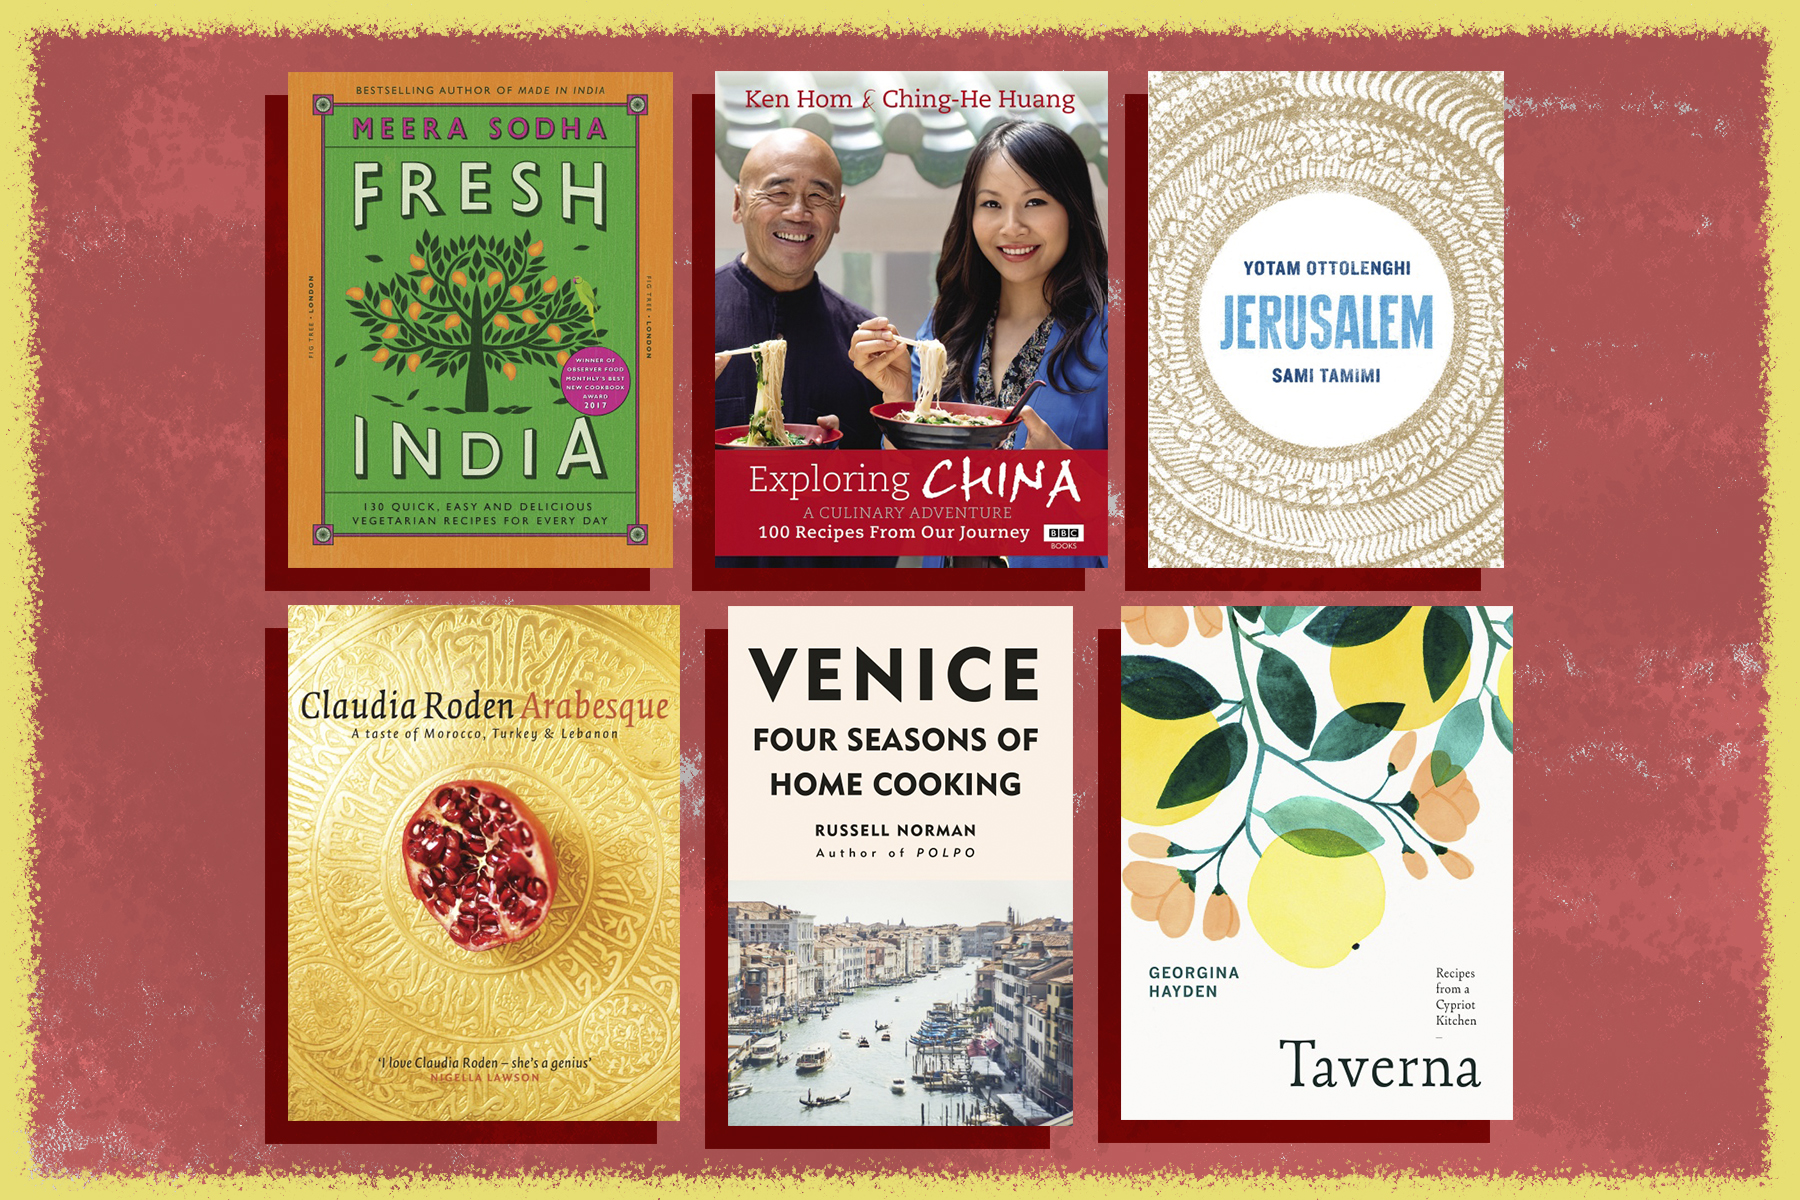 Travel the world from your kitchen with these cookbooks